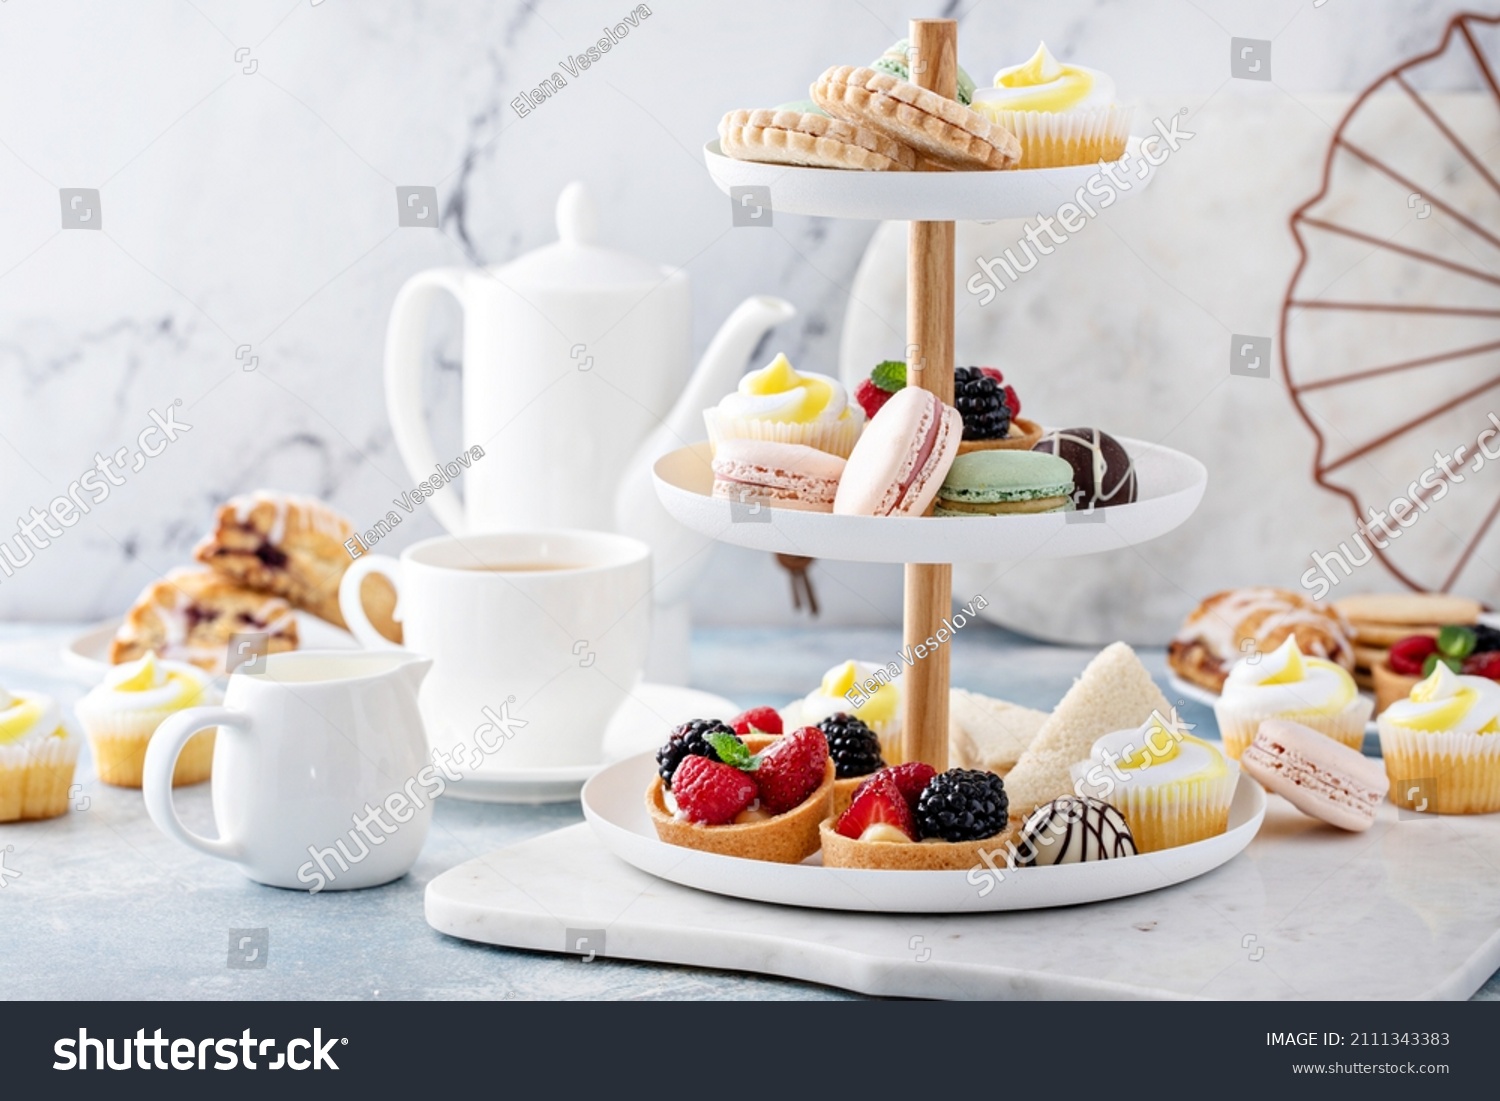 Spring or summer dessert table, three tiered tray with variety of desserts and sandwiches for tea #2111343383